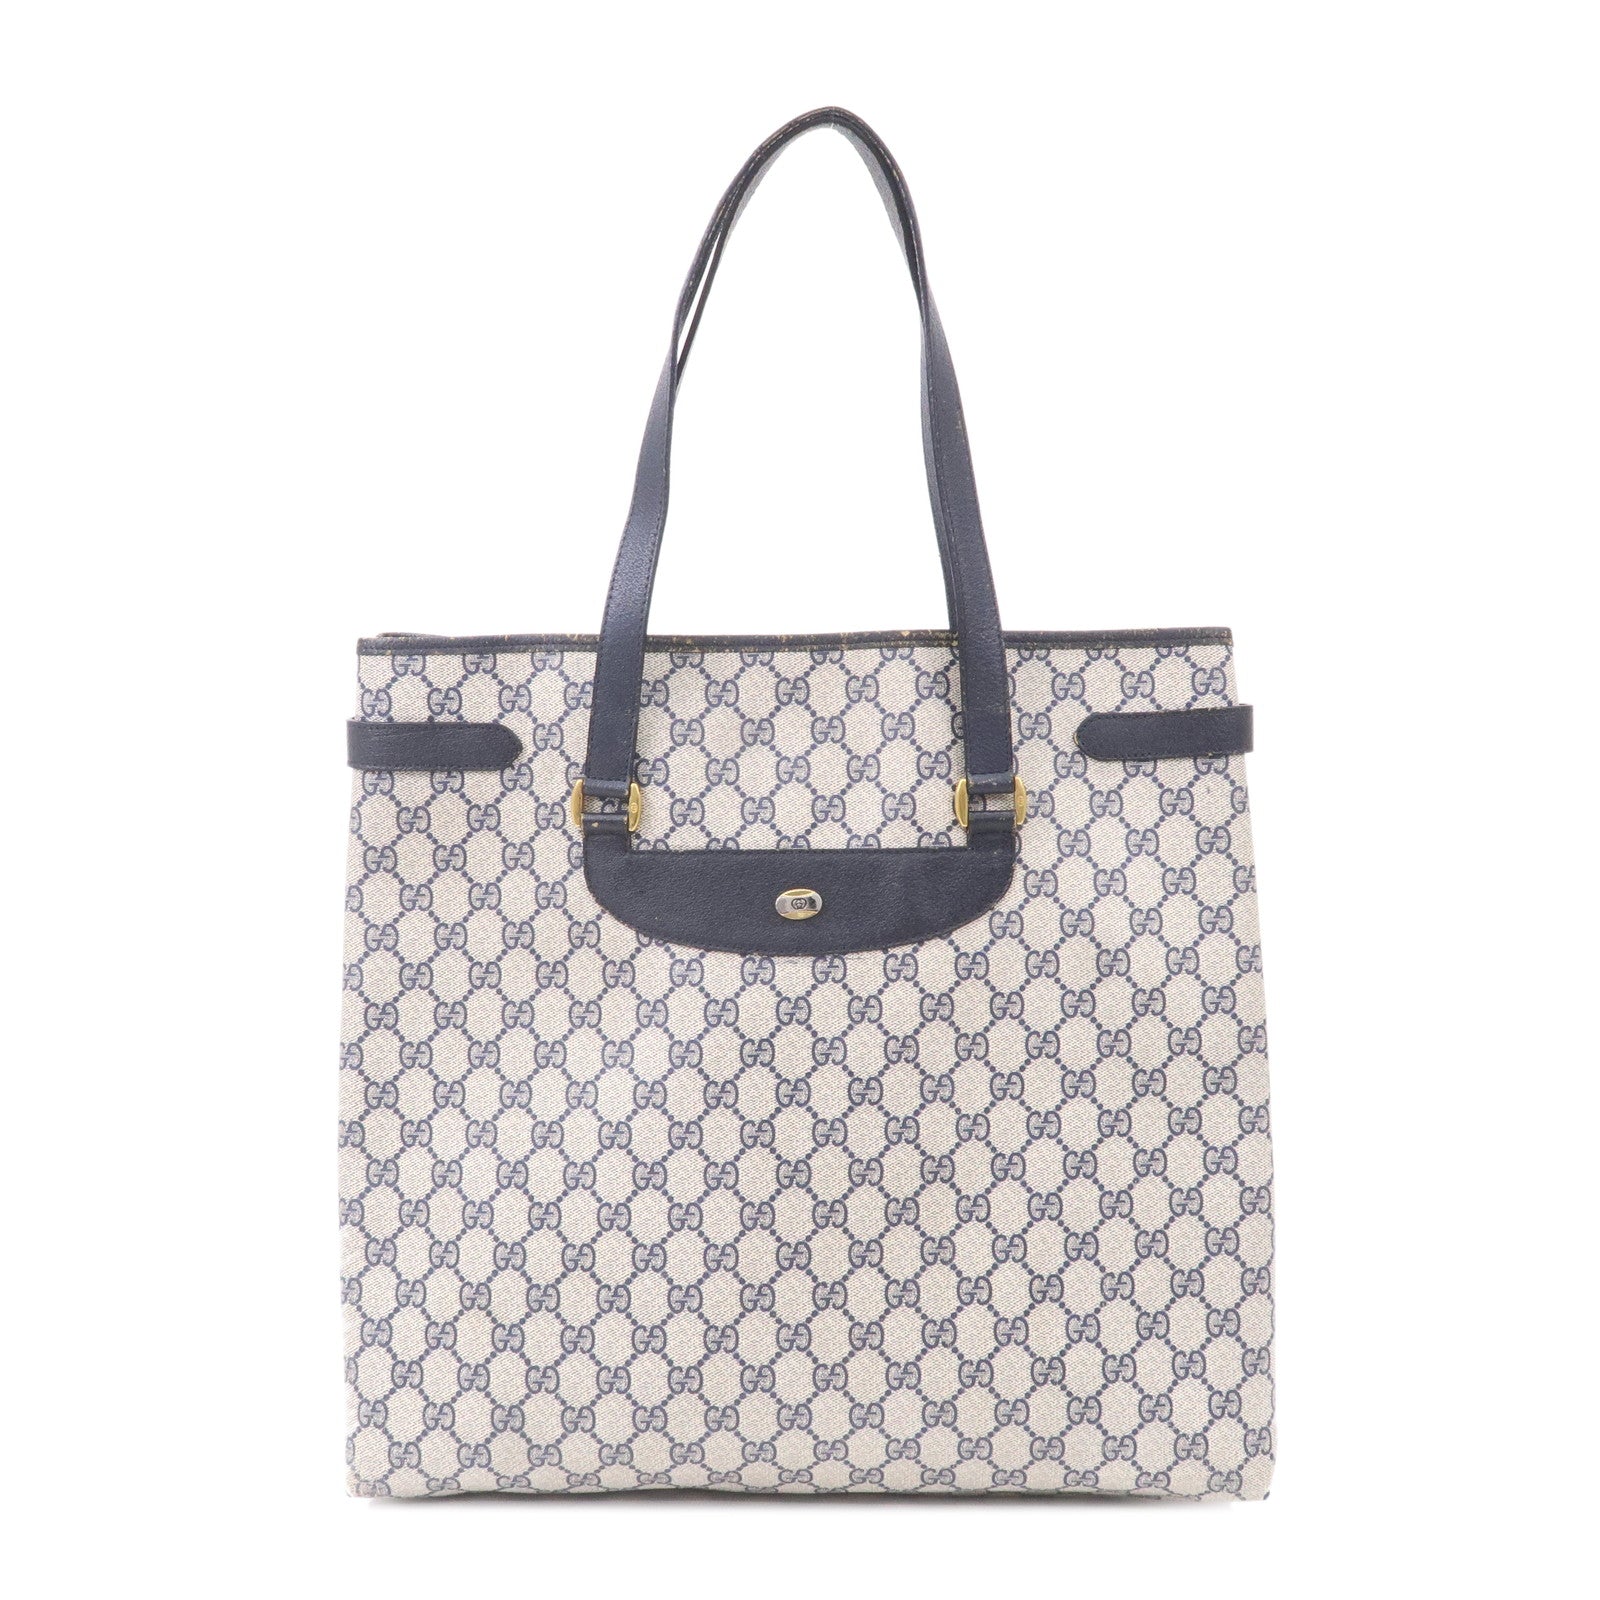 GUCCI-Old-Gucci-GG-Plus-Leather-Tote-Bag-Beige-Navy-39.02.061